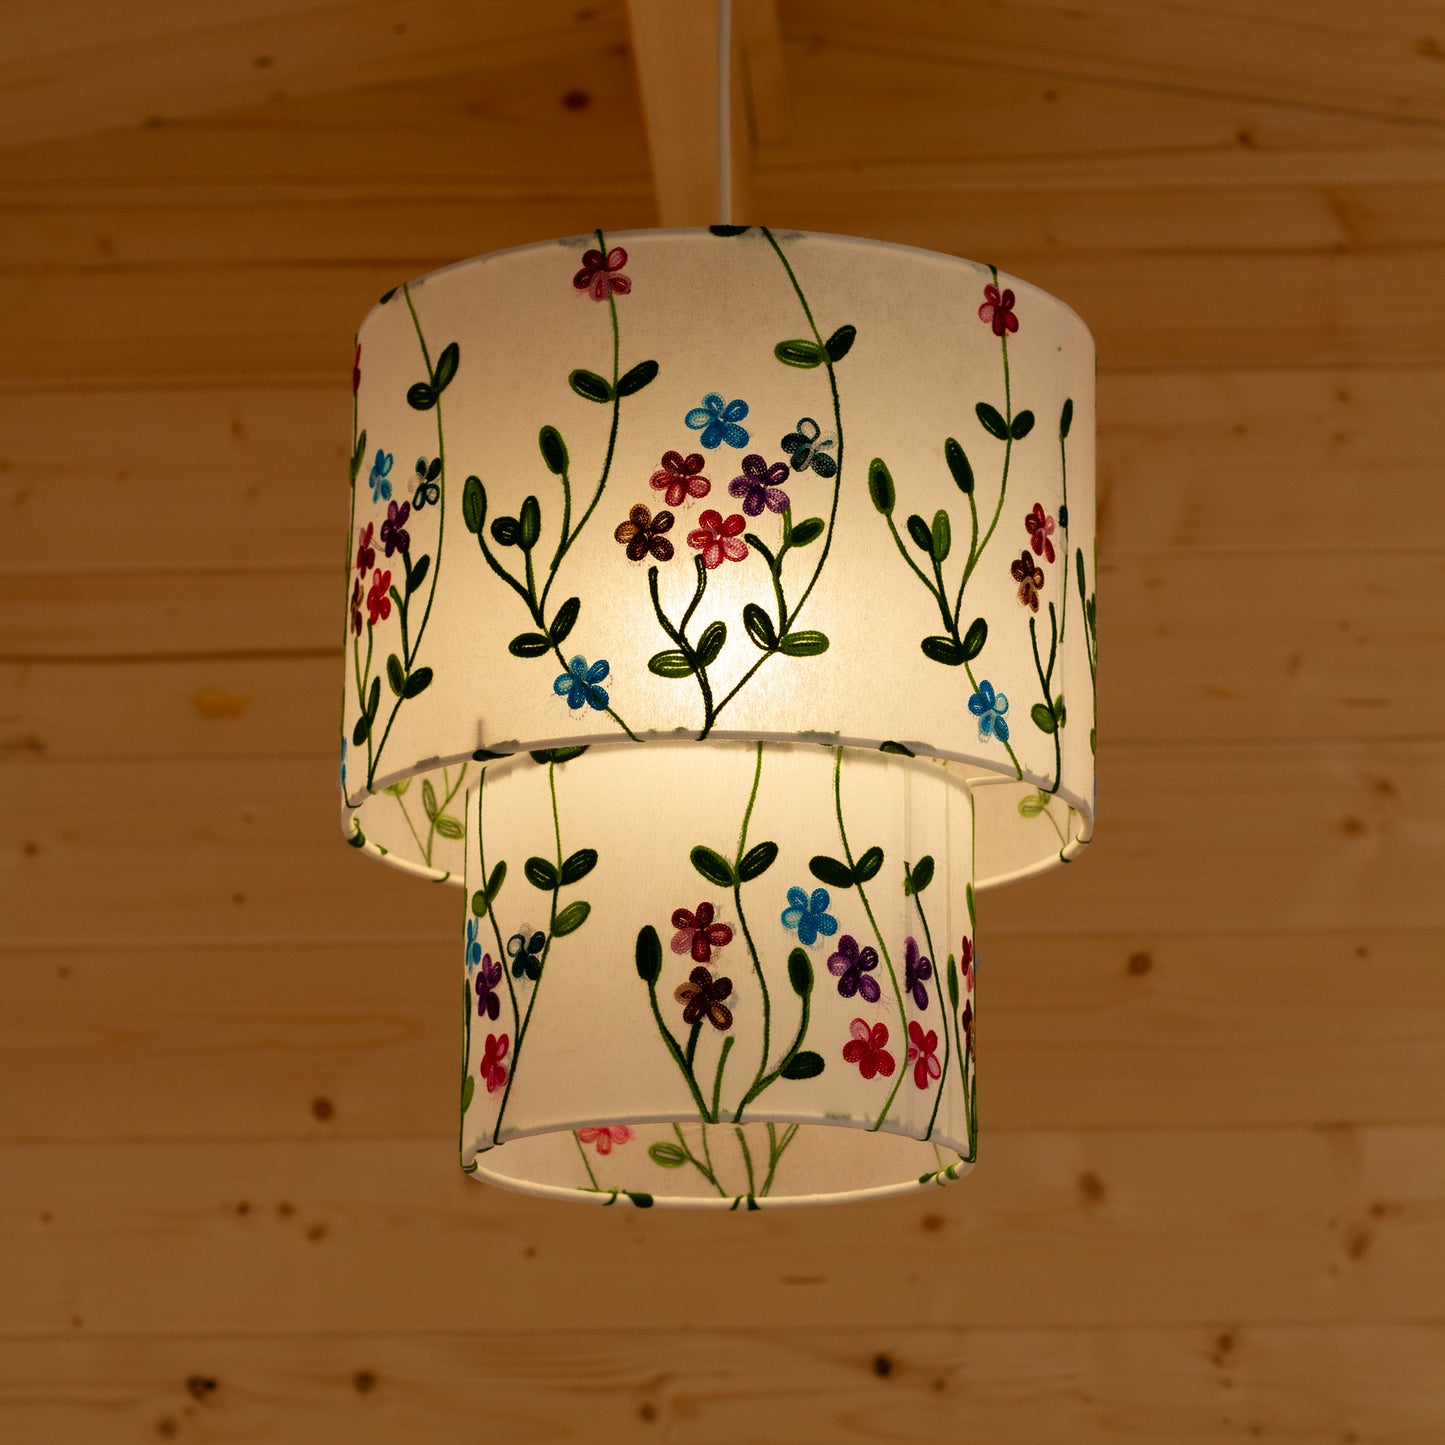 2 Tier Lamp Shade - P43 - Embroidered Flowers on White, 30cm x 20cm & 20cm x 15cm